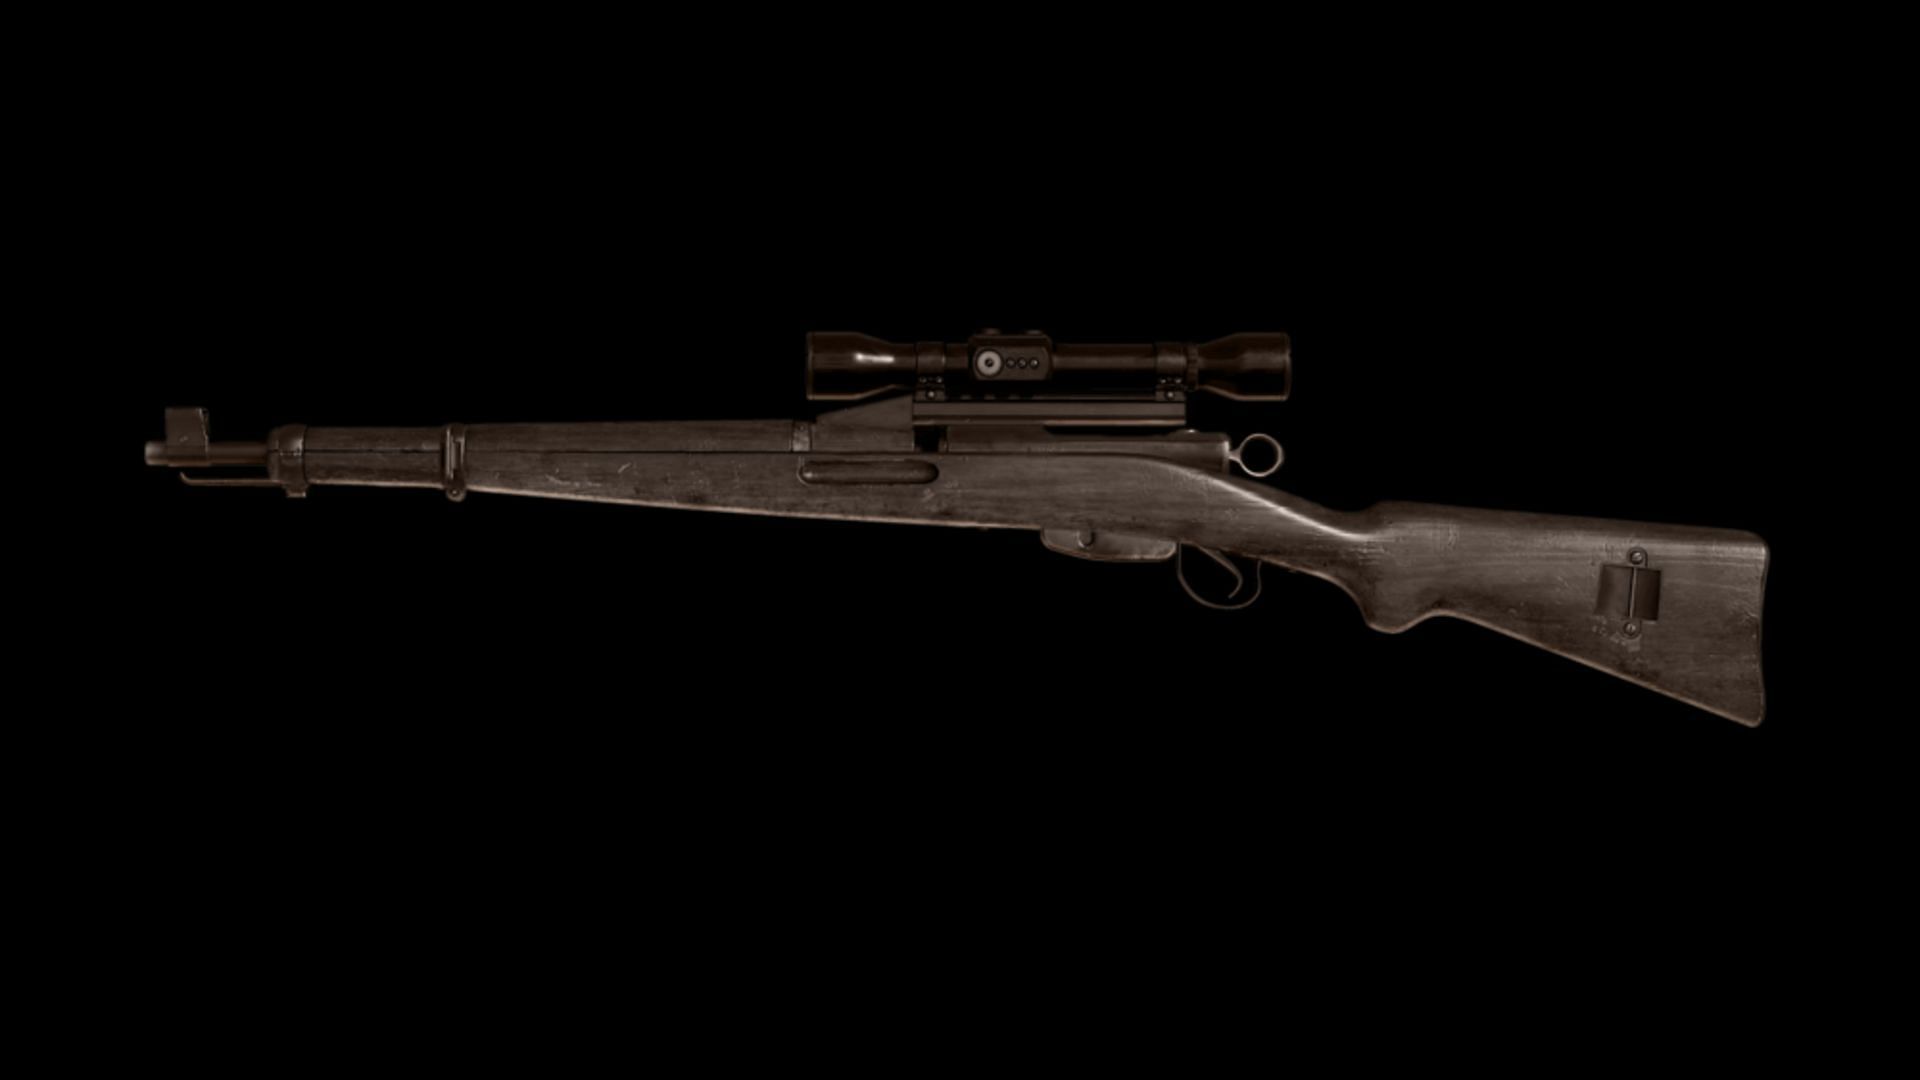 The Swiss K31 continues to impress (Image via Activision)